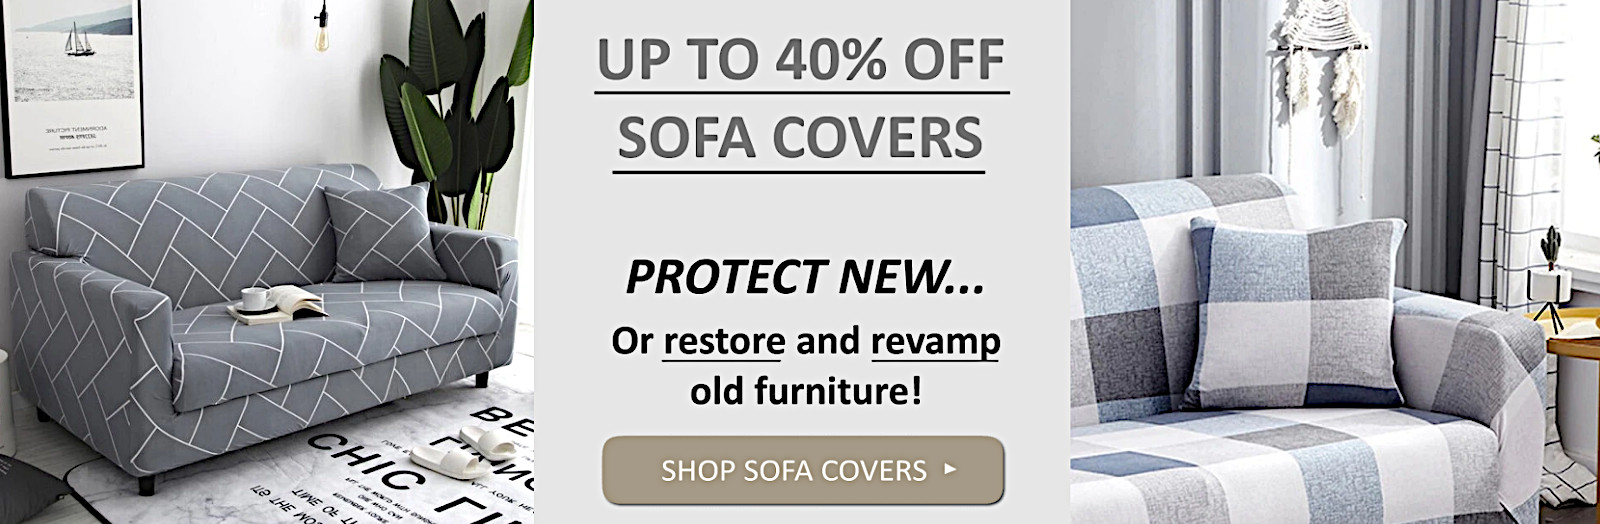 Closeout Price sofa covers